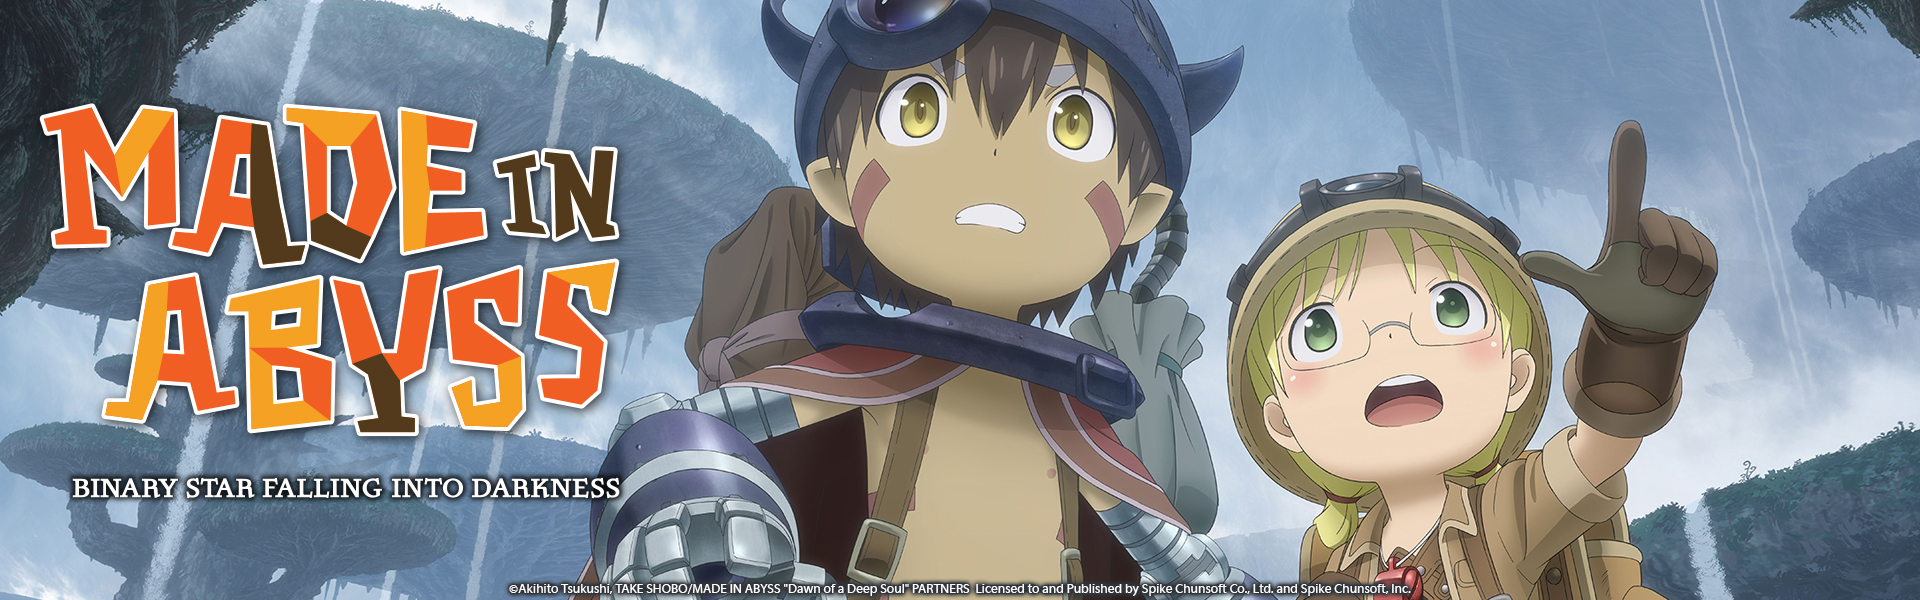 Made in Abyss: Binary Star Falling into Darkness - Spike Chunsoft